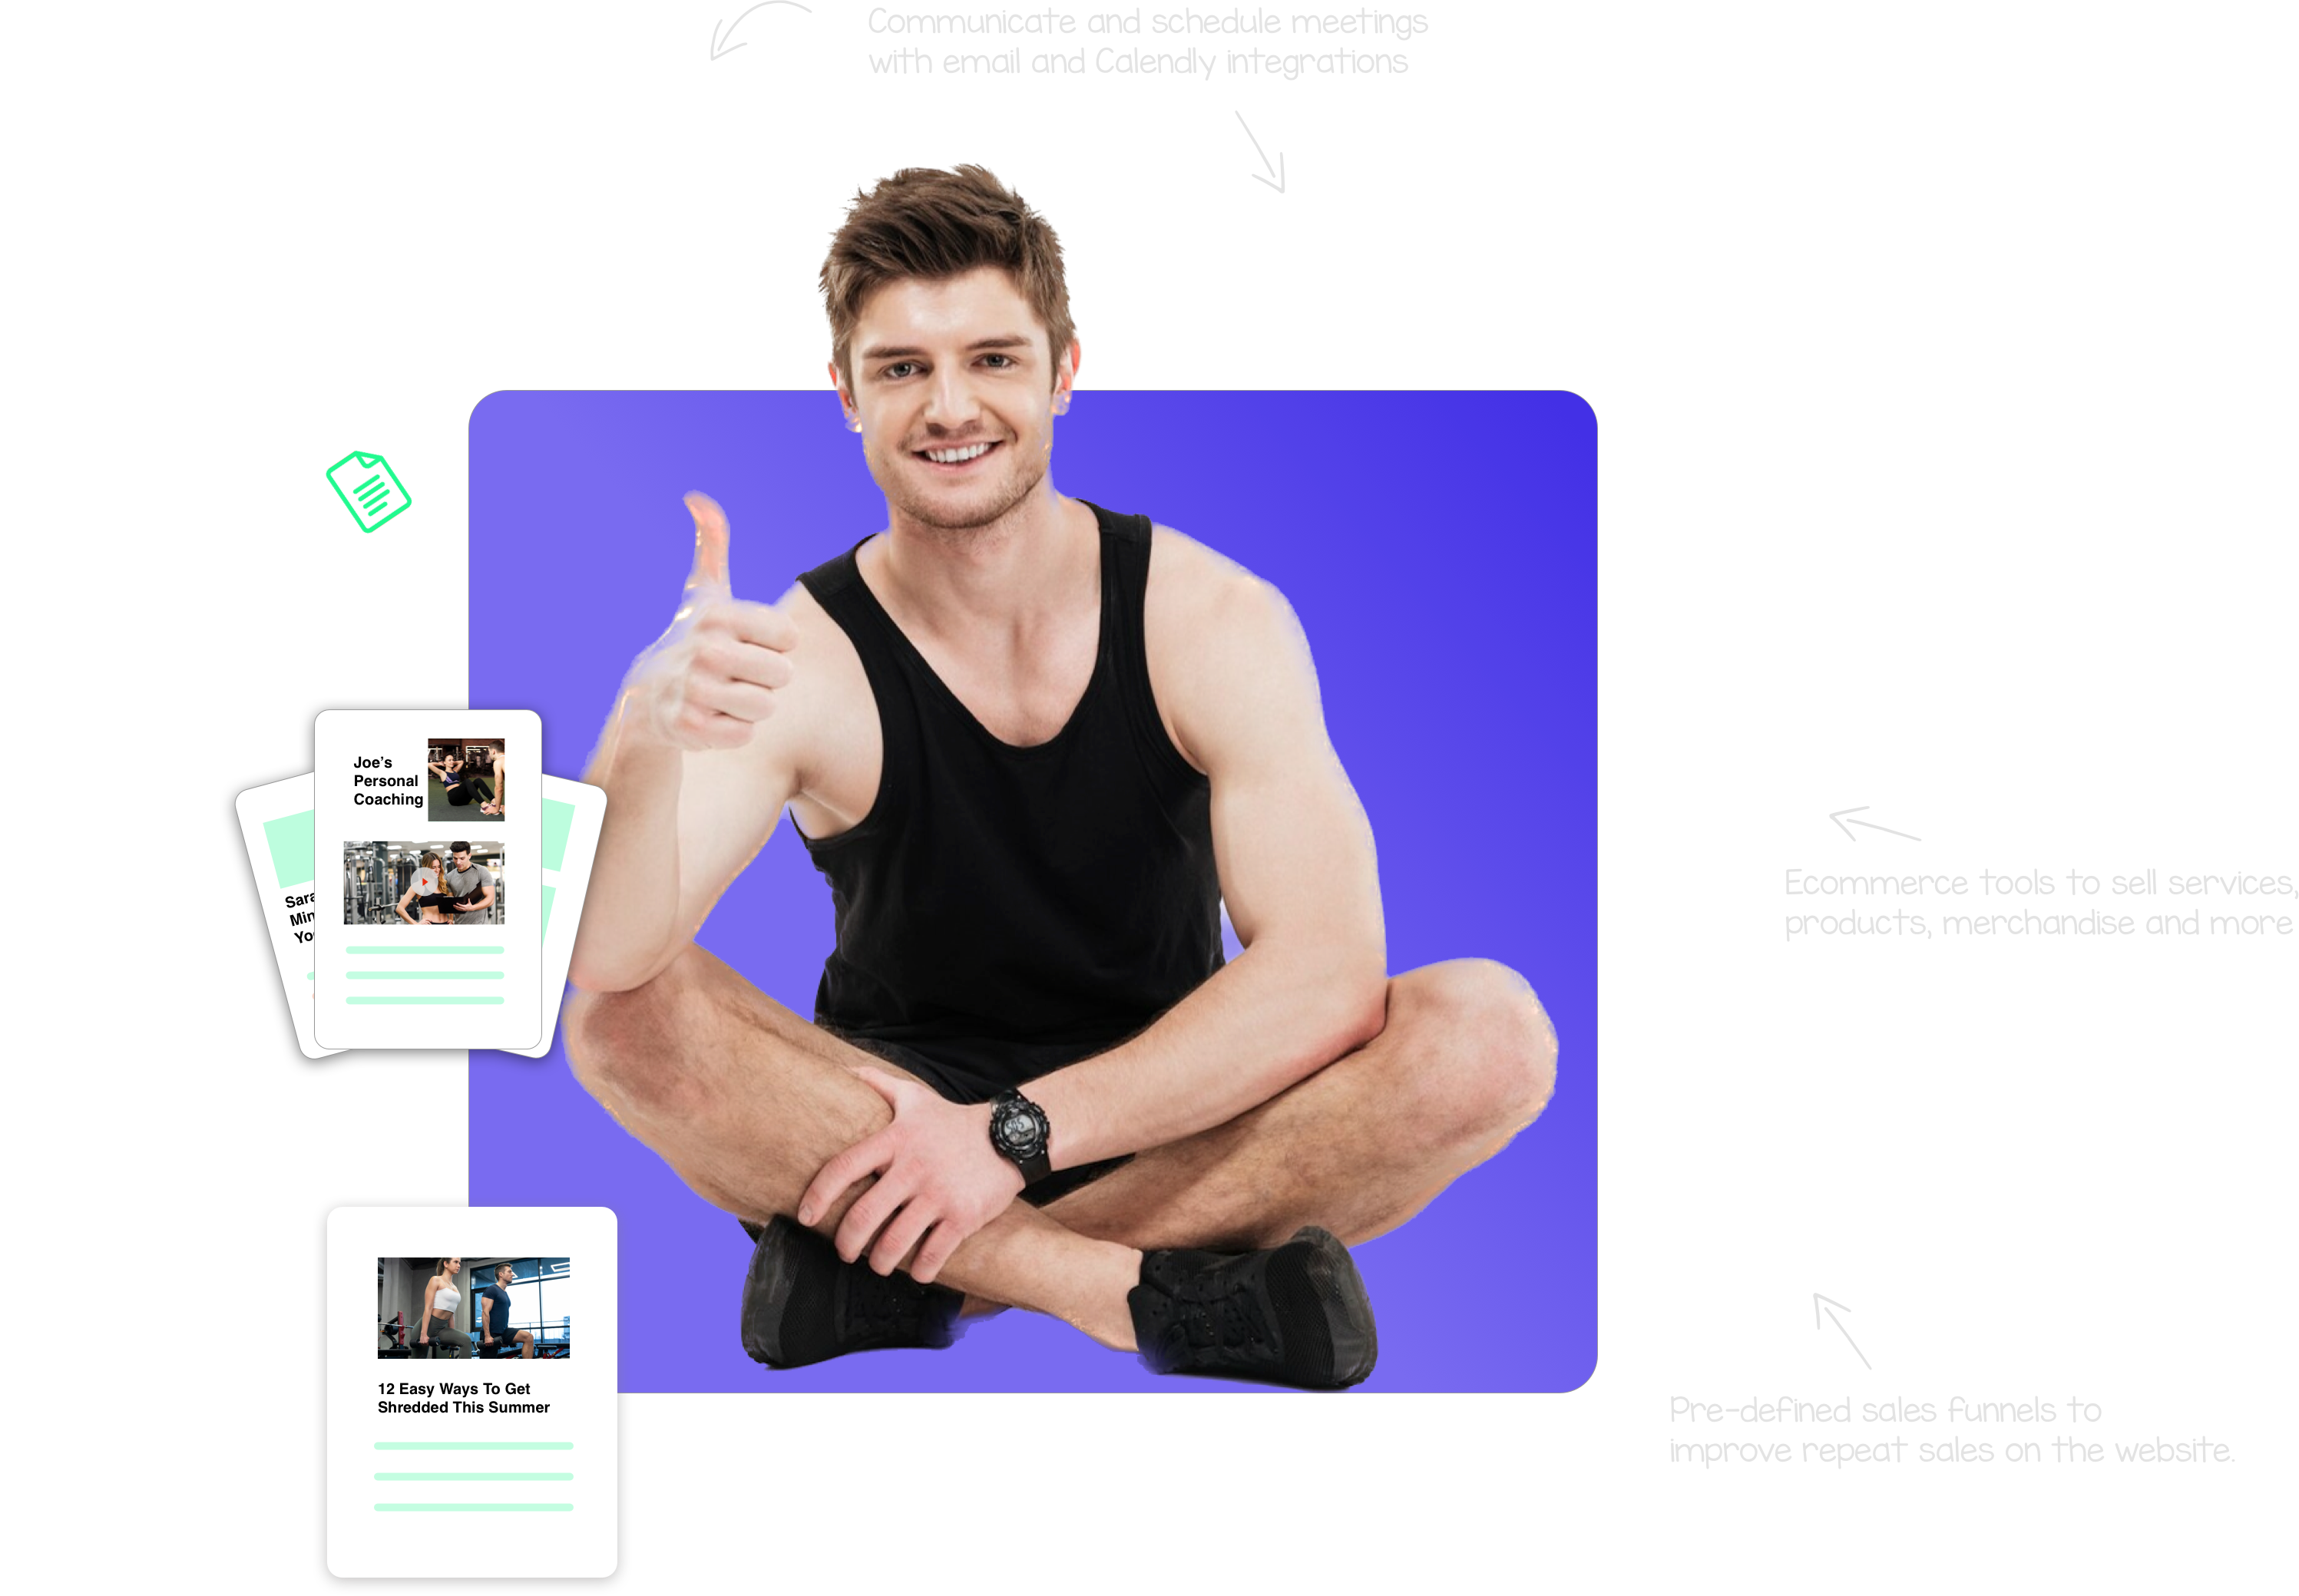 SEO Optimized CMS, multiple template for bmi calculator, diet planner, convert youtube videos to blog easily.